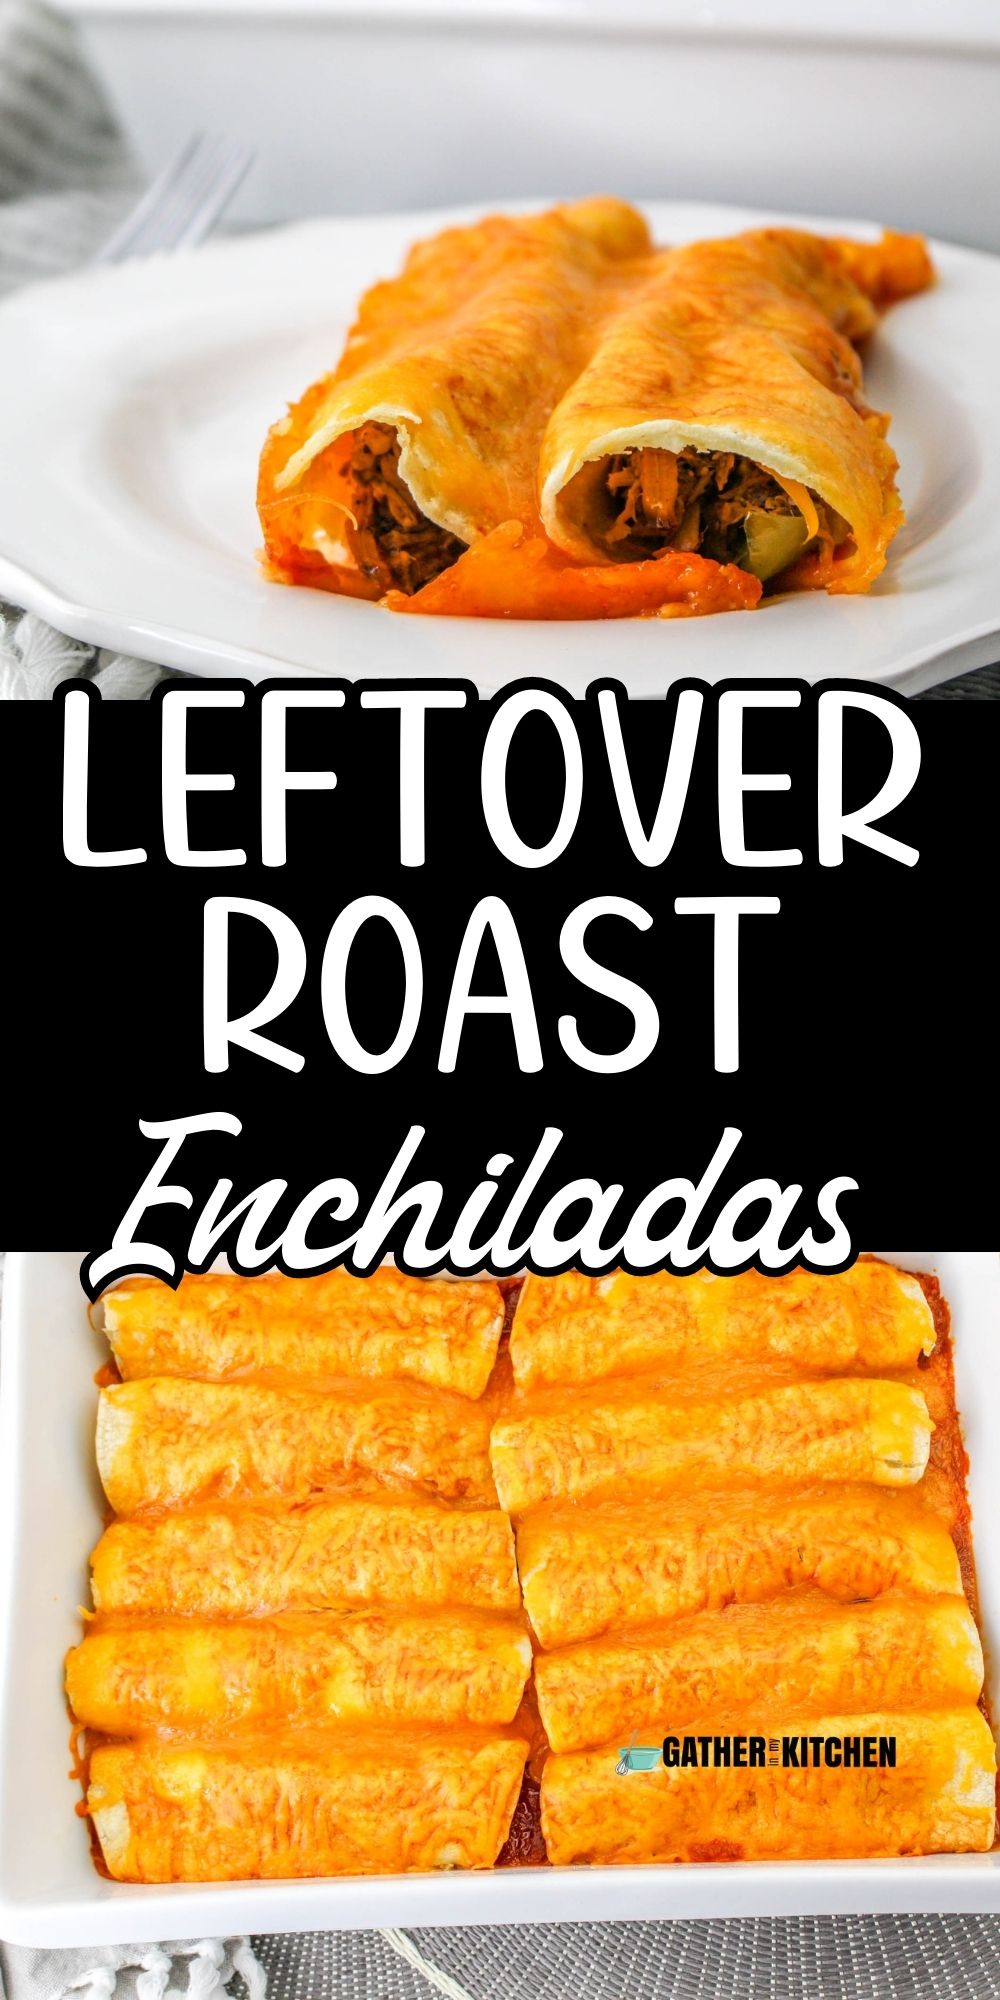 Pin image: top is a plate of enchiladas, middle says "Leftover Roast Enchiladas" and bottom is a tray of enchiladas.